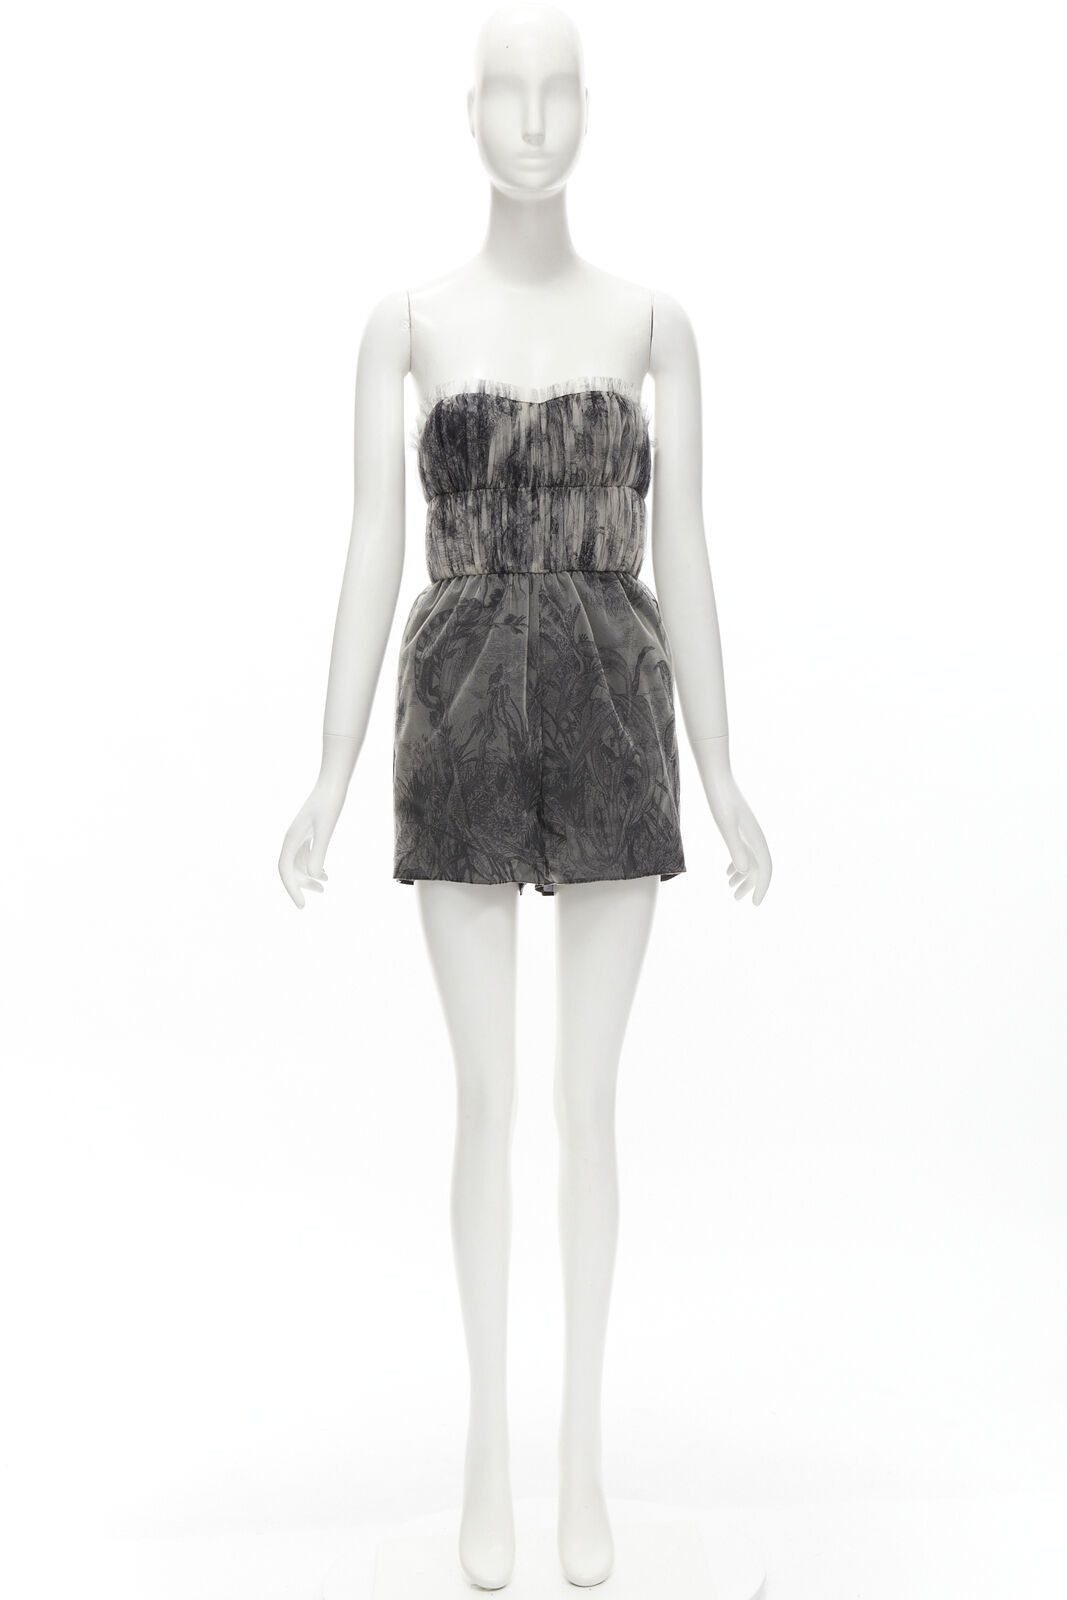 Dior new CHRISTIAN DIOR Fantaisie Dioriviera tulle gathered pleated romper FR34 XS Size 26" / US 2 / IT 38 - 10 Preview